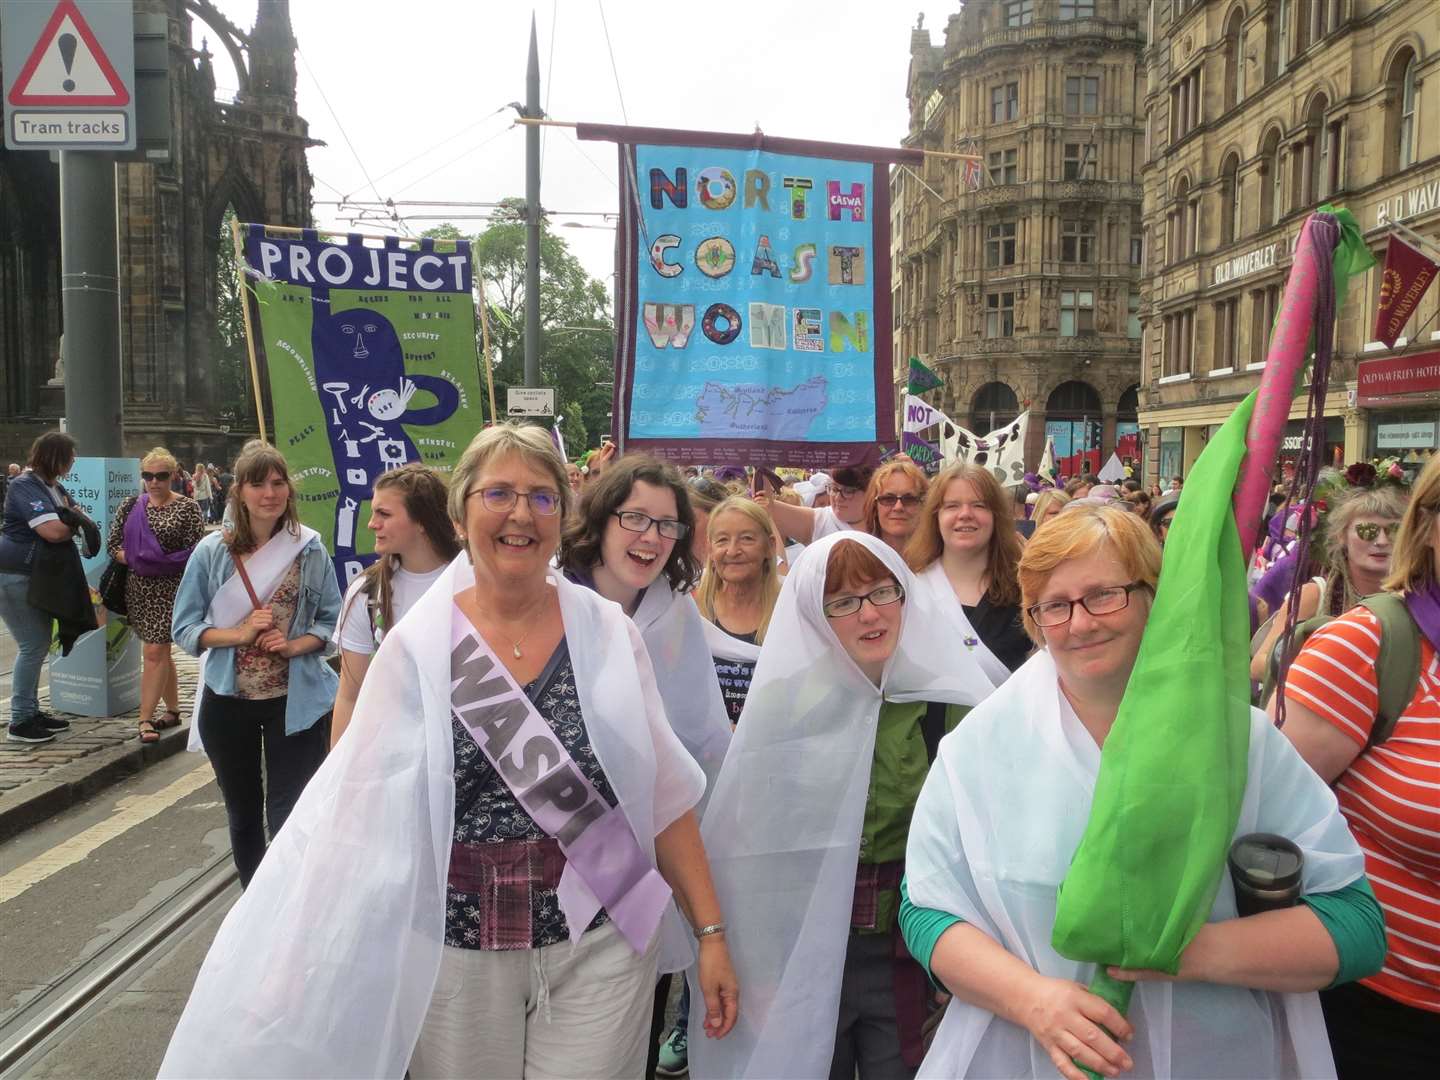 North Coast women taking part in processions on Princes Street in Edinburgh.